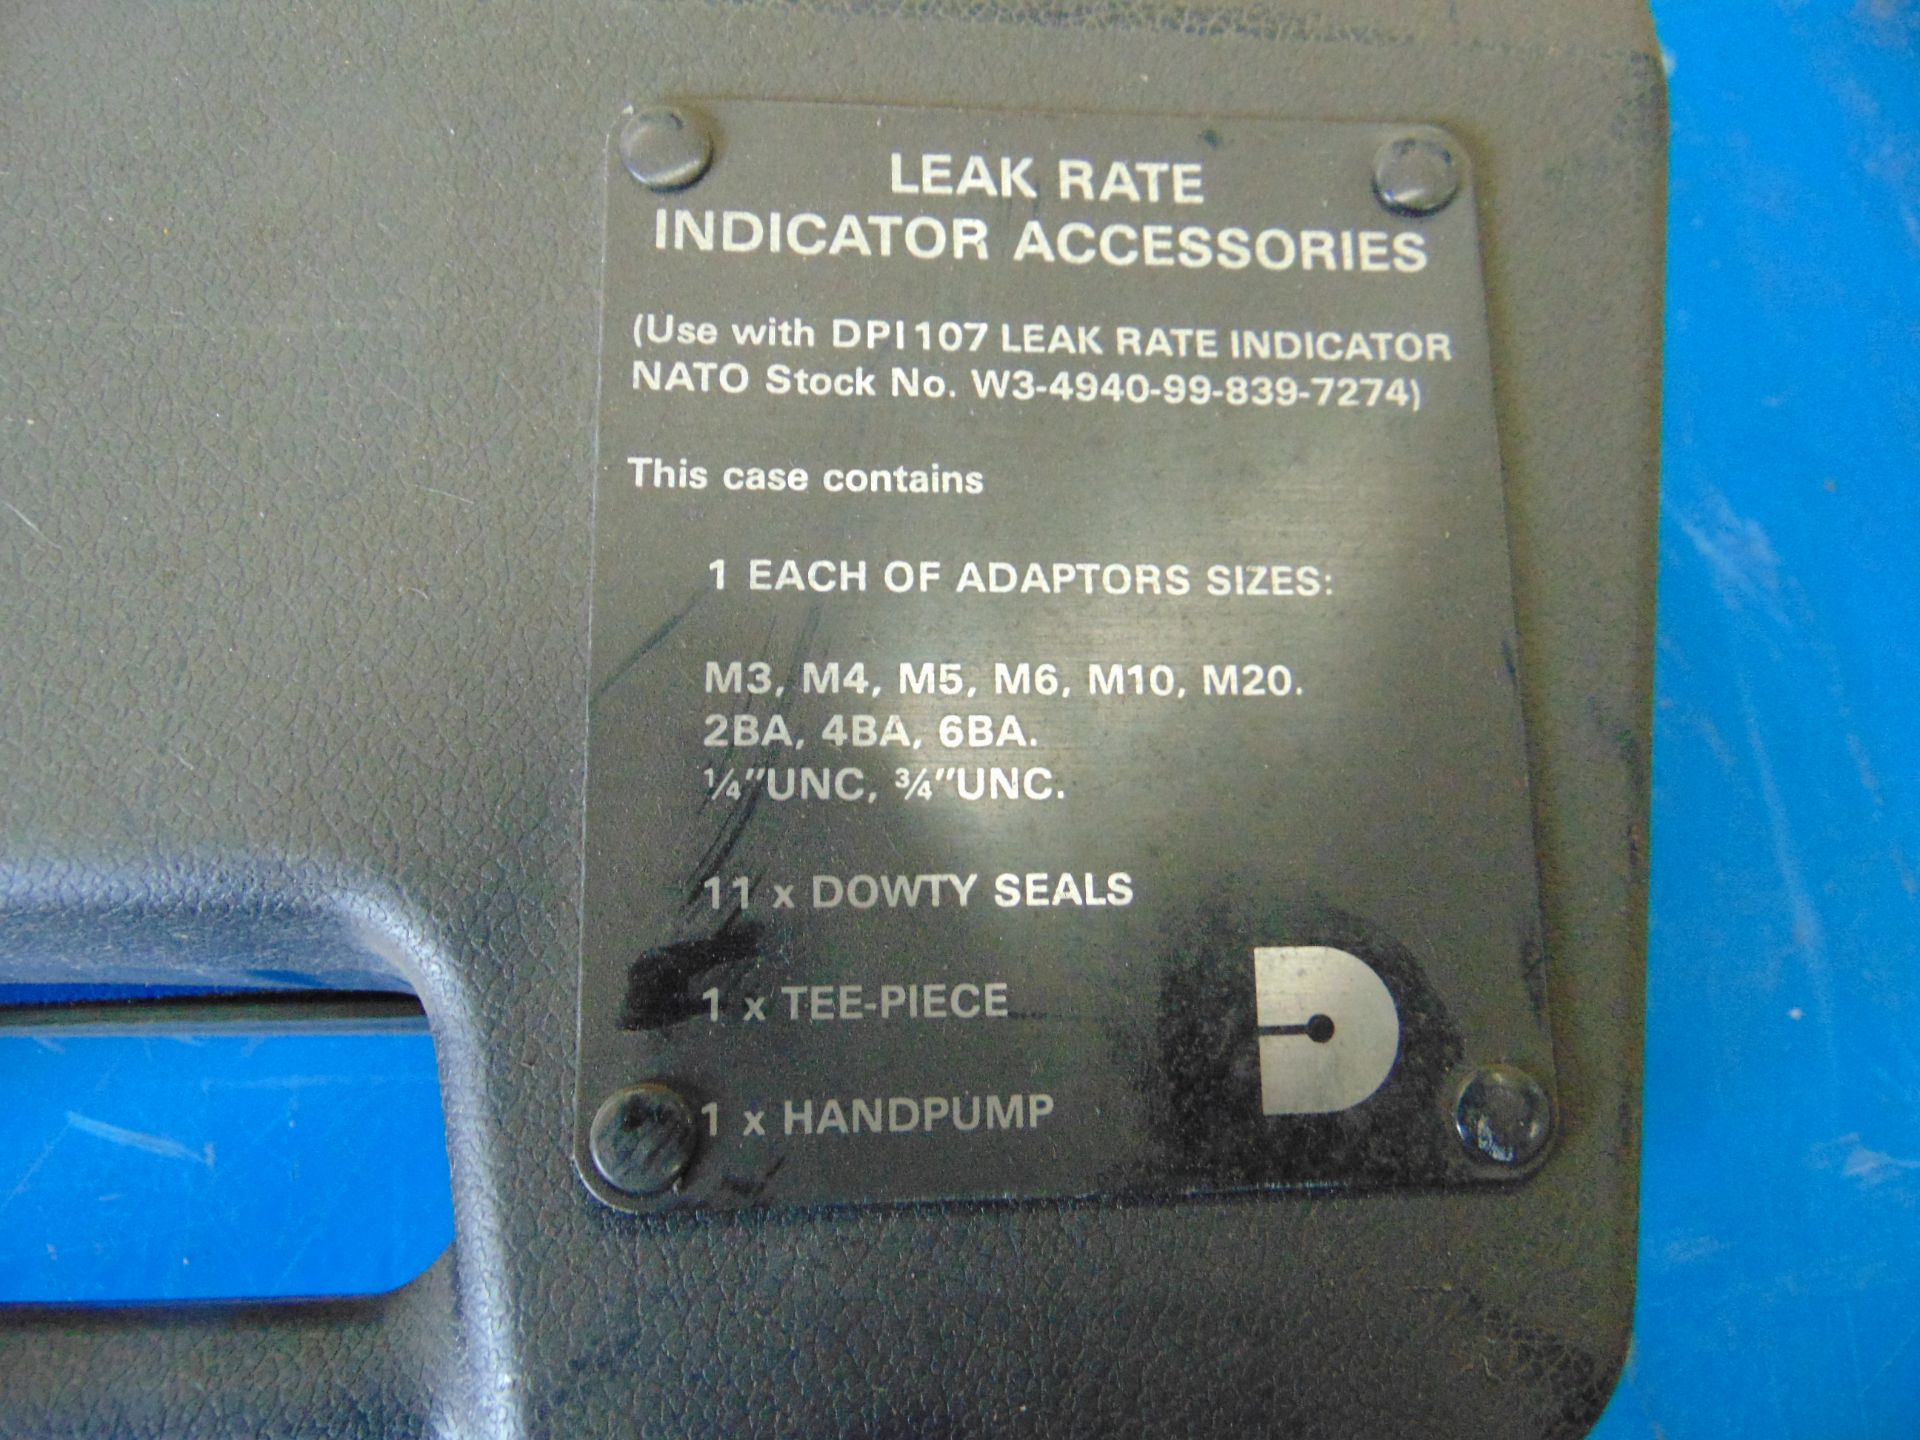 LEAK RATE INDICATOR ACCESSORY KIT IN CASE - Image 5 of 5